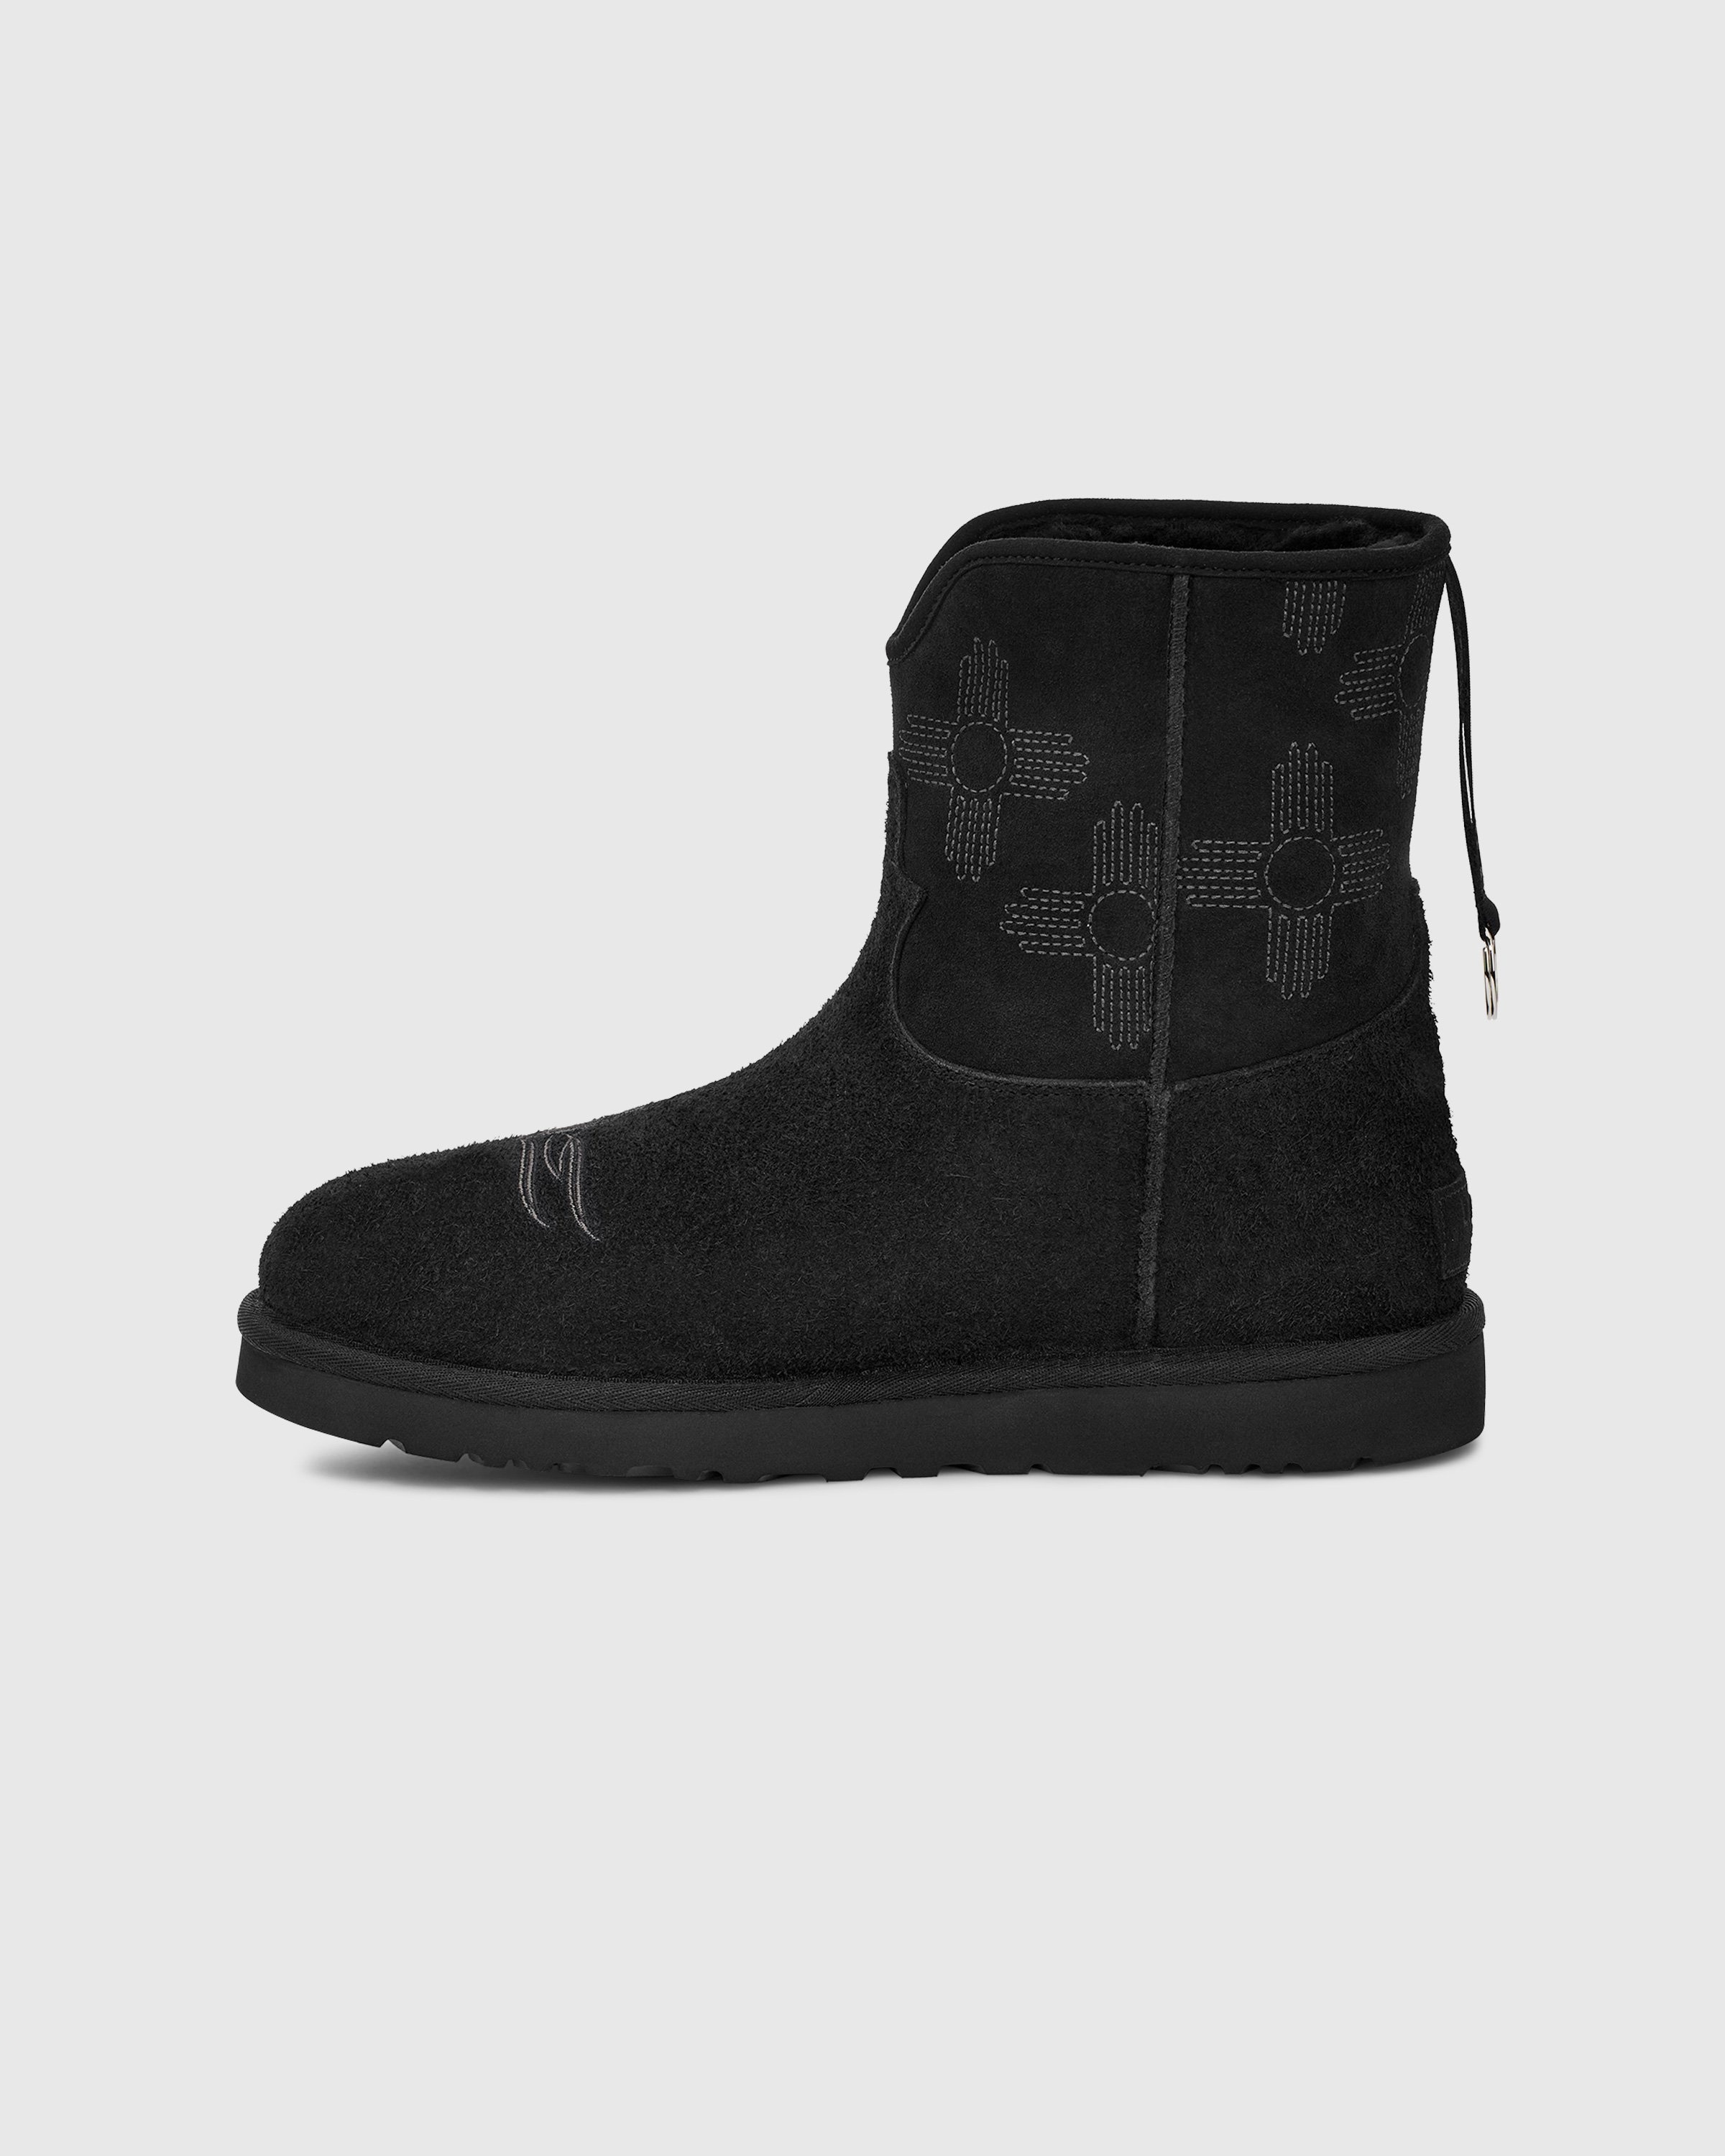 Ugg x Children of the Discordance – Classic Short Boot Black - Lined Boots - Black - Image 2